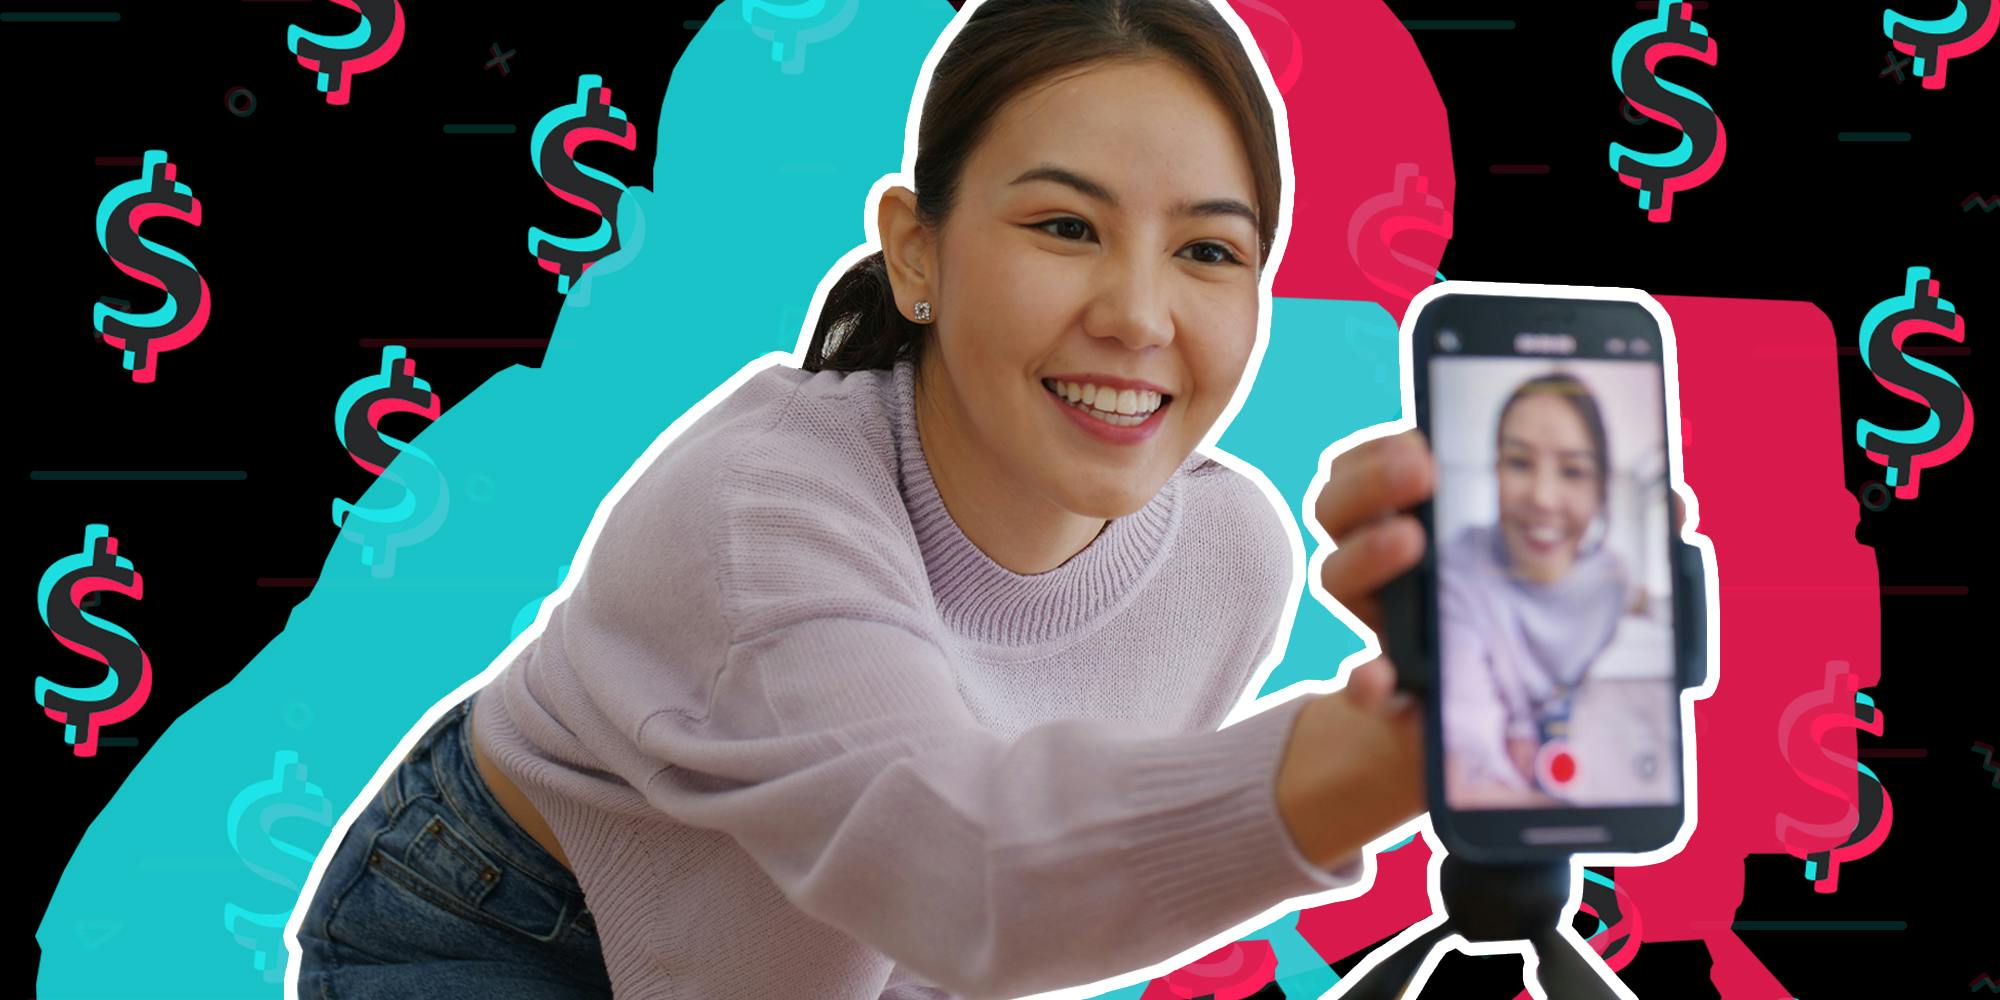 How To Monetize Your TikTok Whether You Have 1,000 Followers Or 50,000